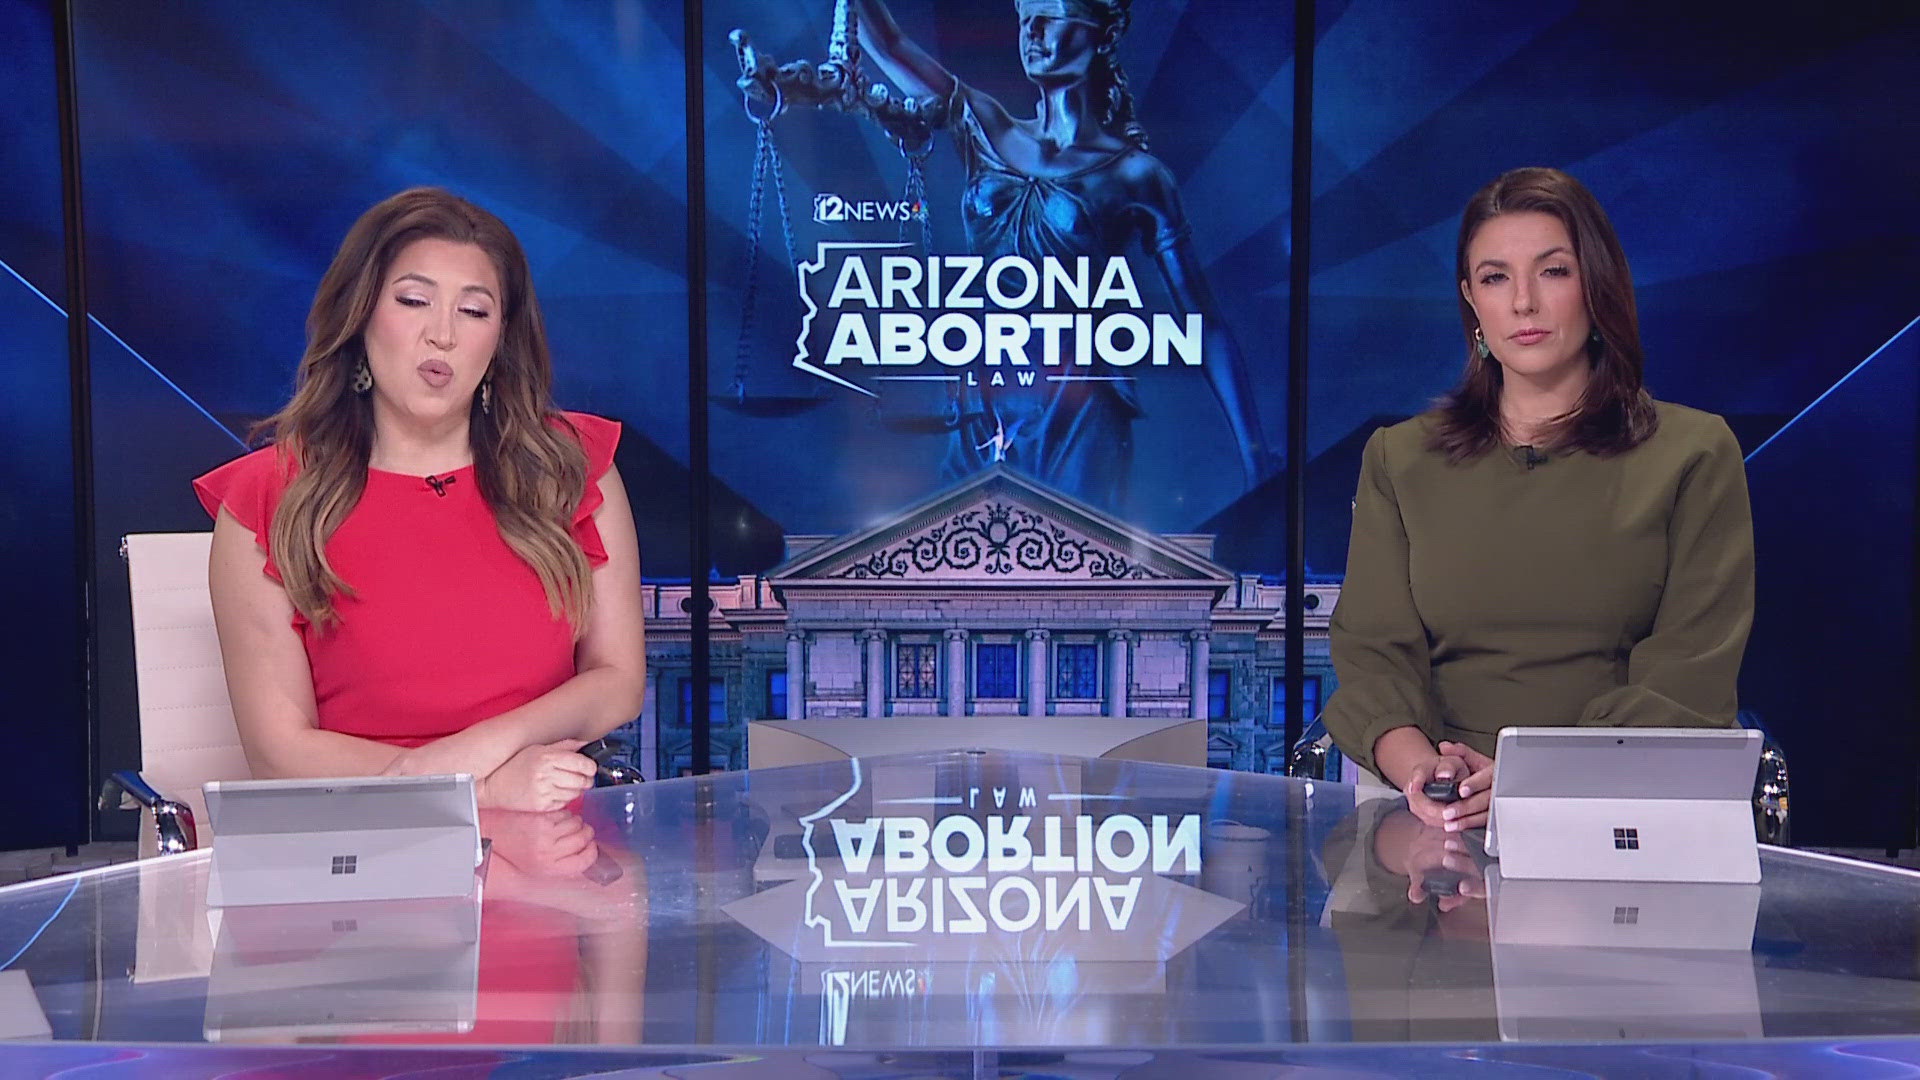 The Arizona Senate is expected to vote on a bill to repeal the 1864 abortion ban. Here's what we can expect from Wednesday's session.